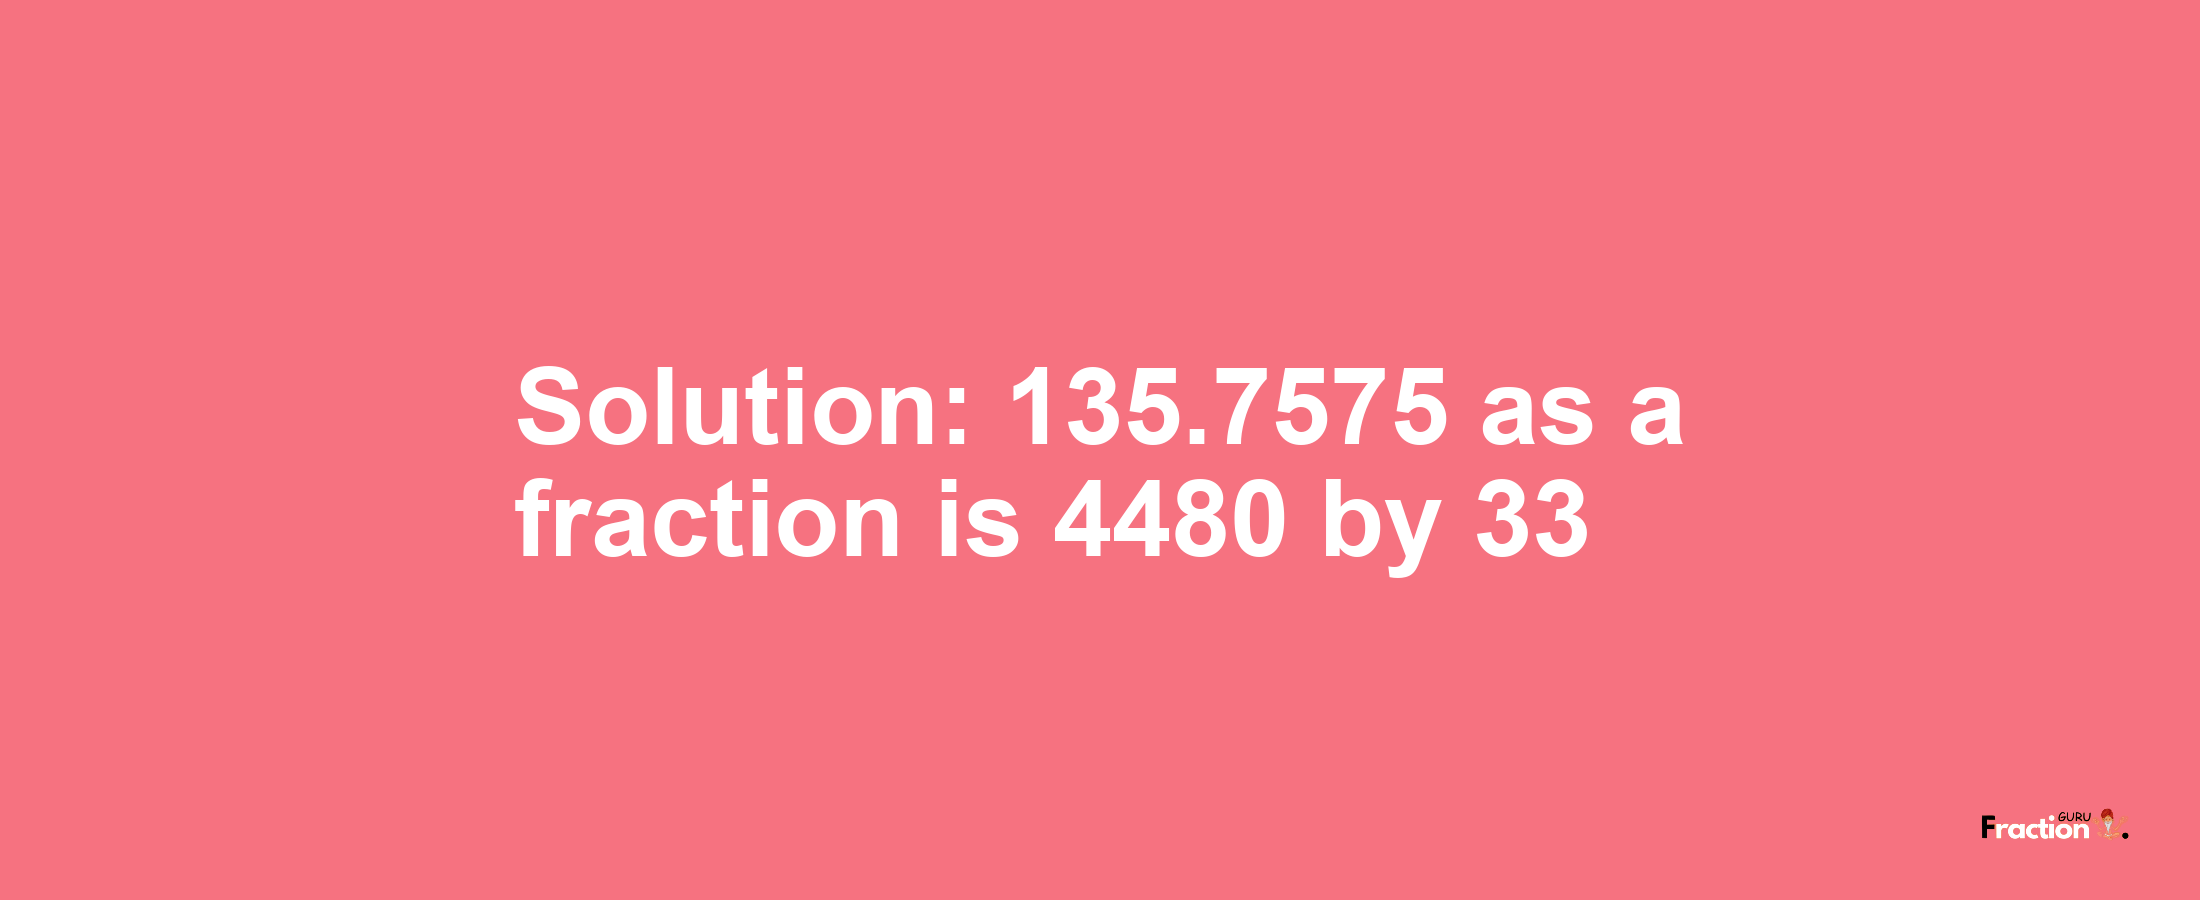 Solution:135.7575 as a fraction is 4480/33